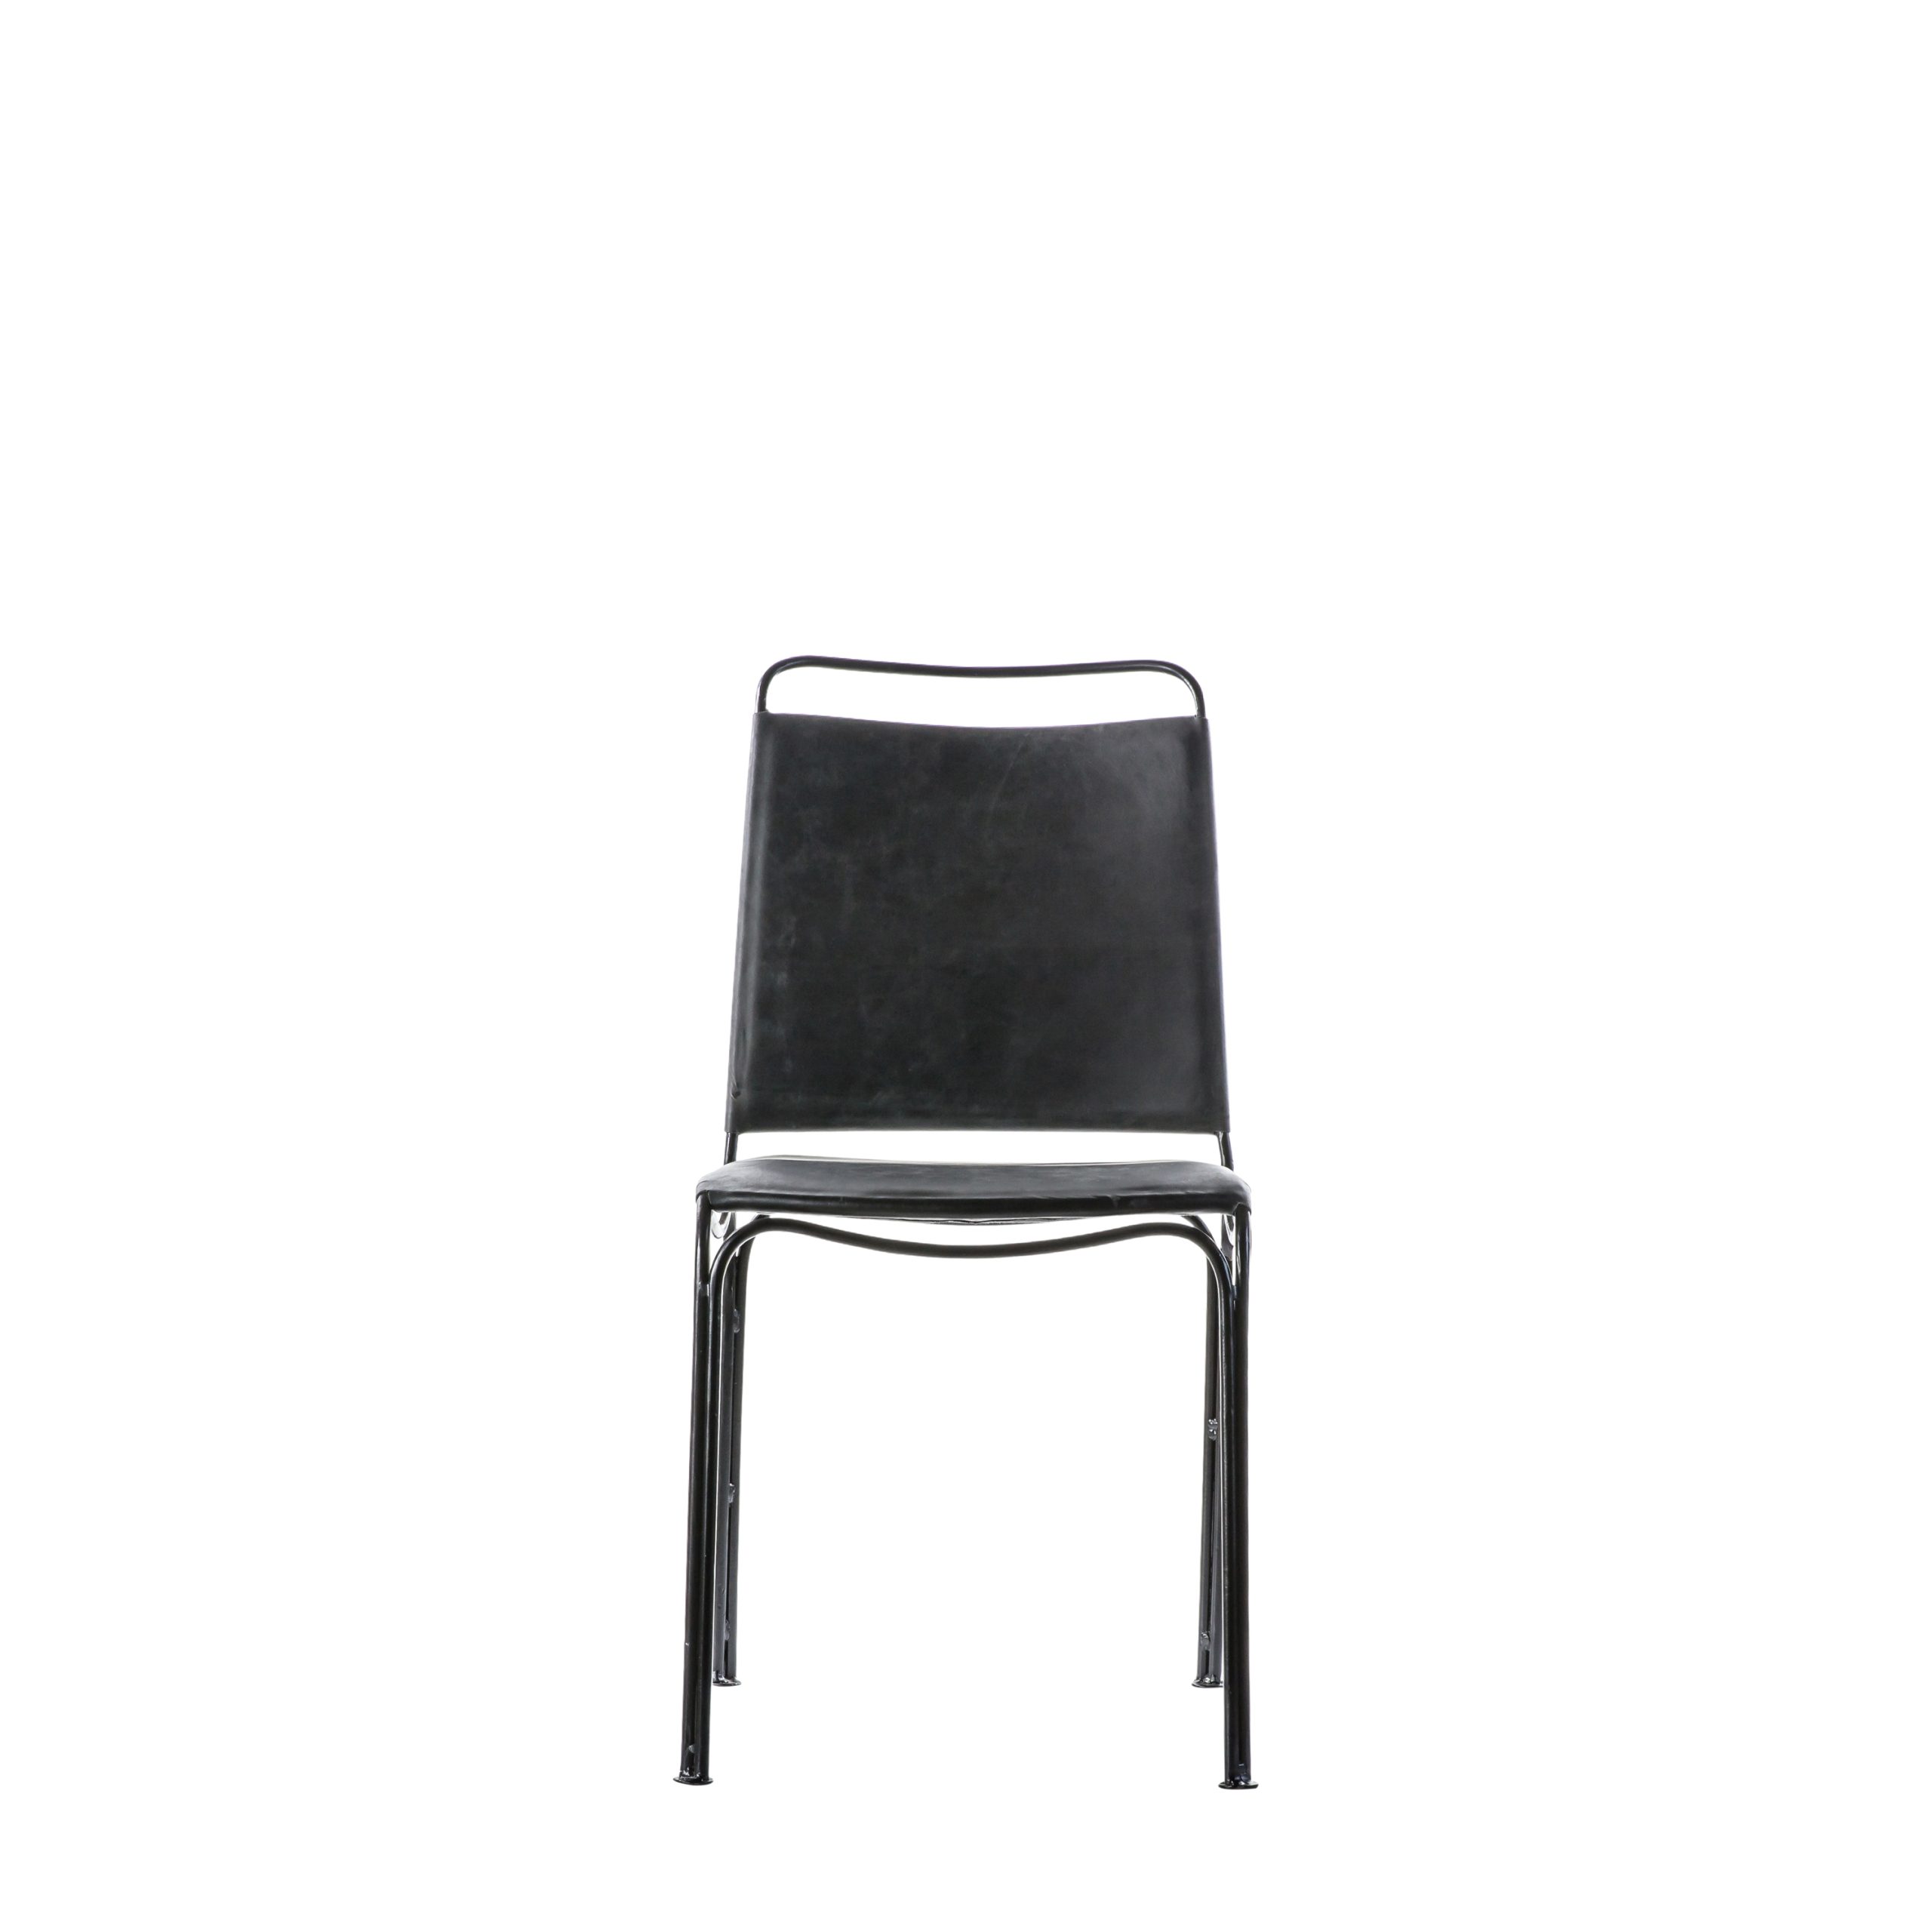 Gallery Direct Petham Dining Chair Black (Set of 2)